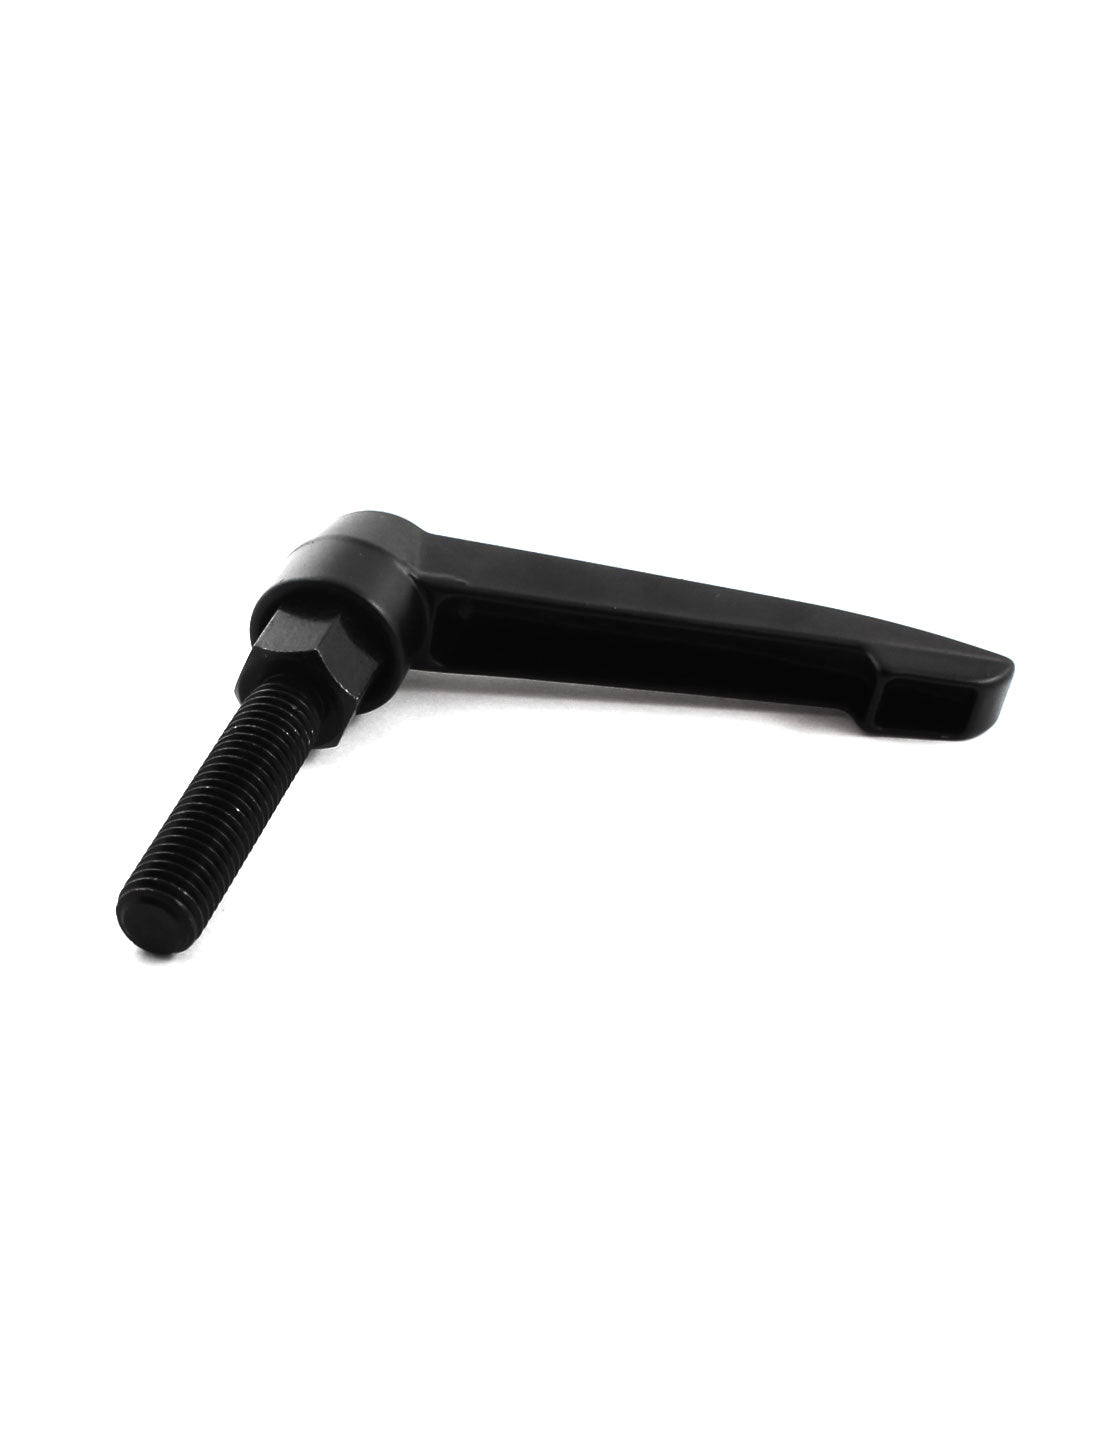 uxcell Uxcell Machinery M12x50mm Male Thread 110mm Long Clamping Lever Adjustable Black Metal Knob Handle Grip